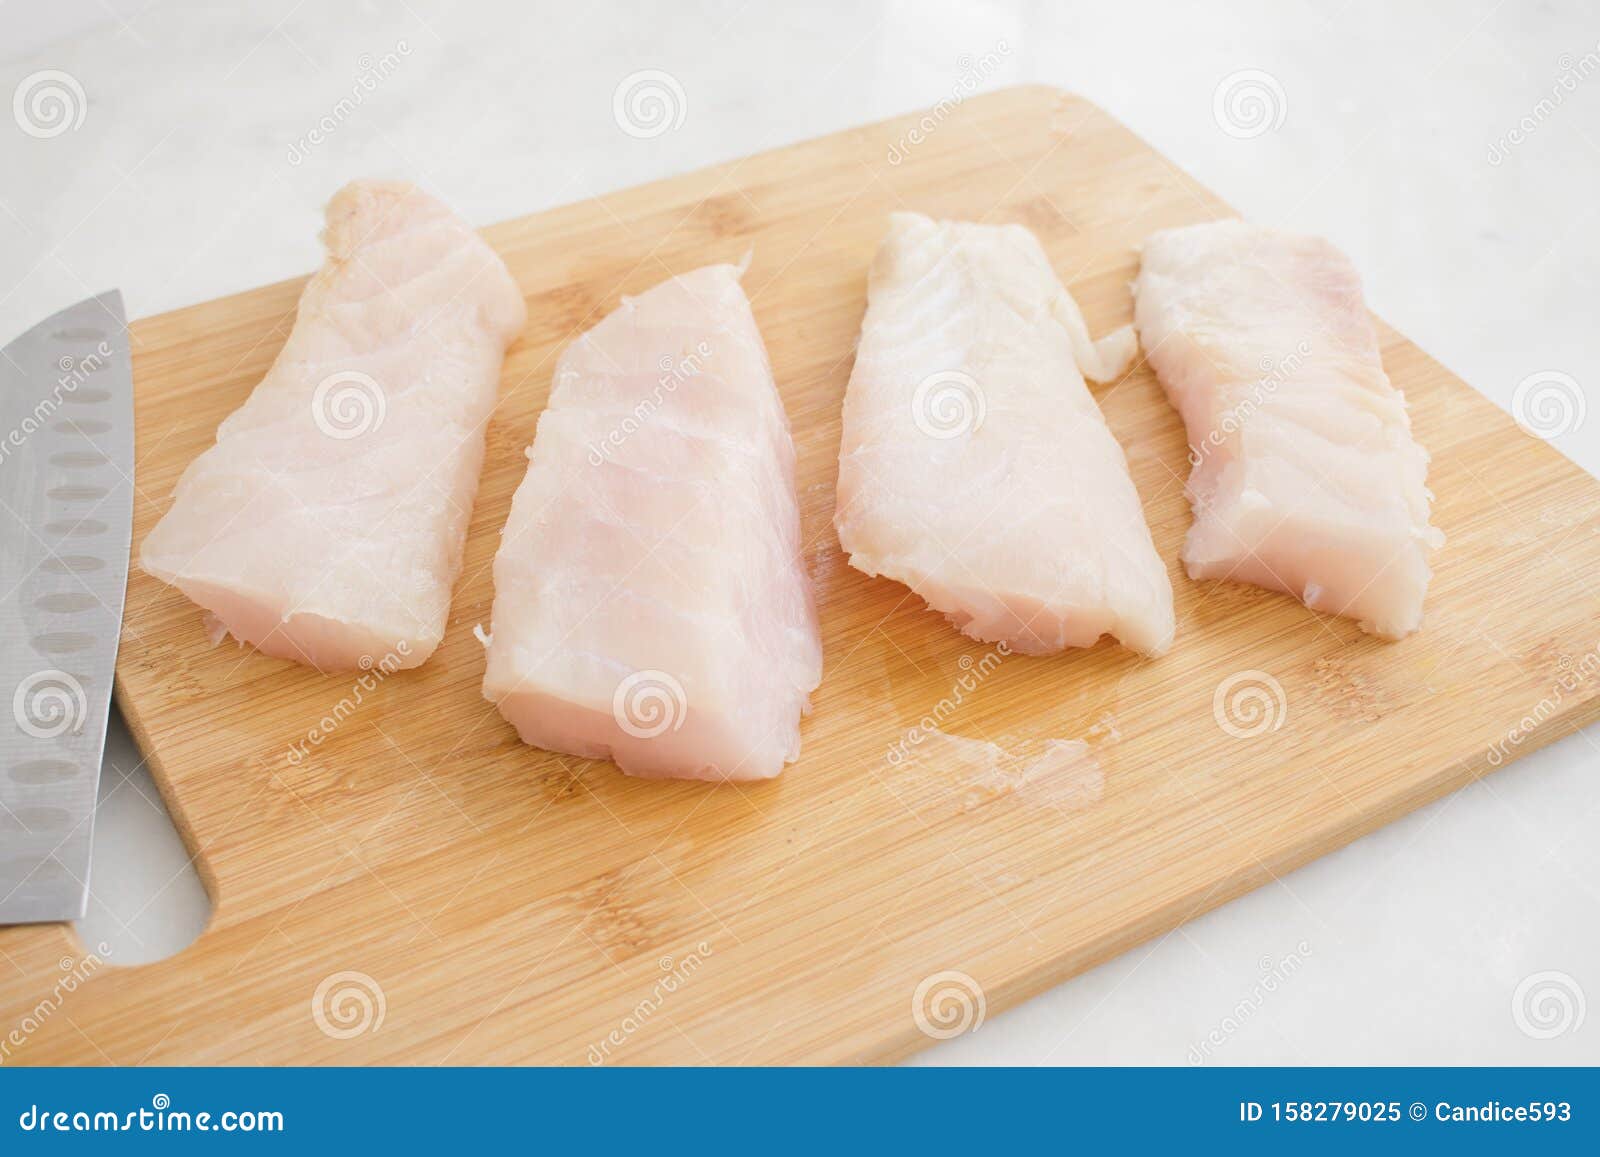 raw grouper fillets on a cutting board